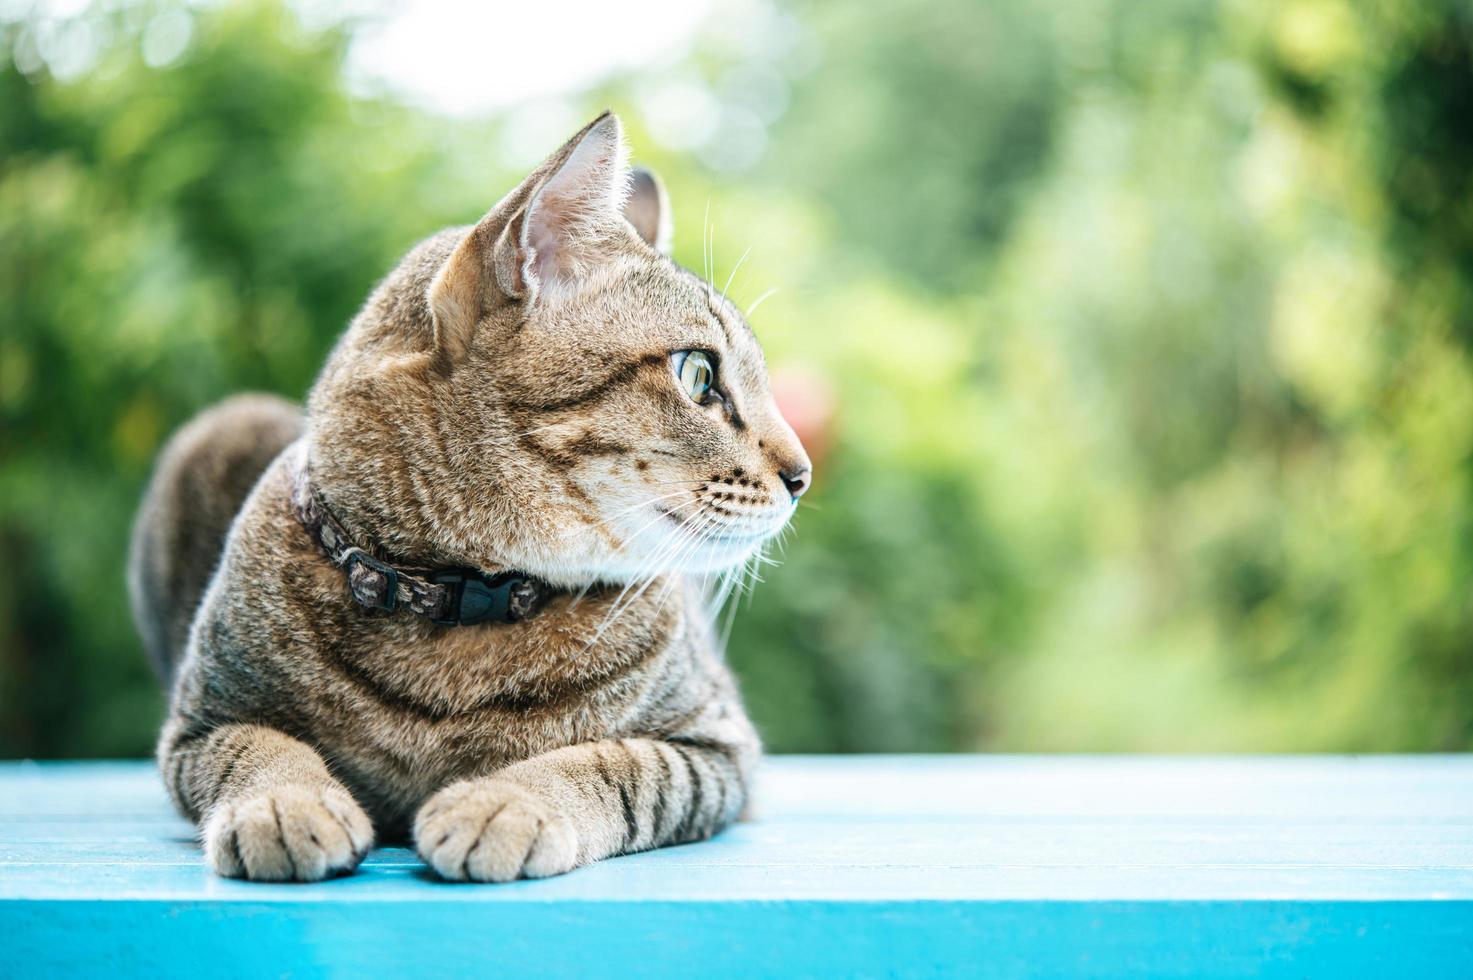 Close-up of a tabby cat on a blue surface photo